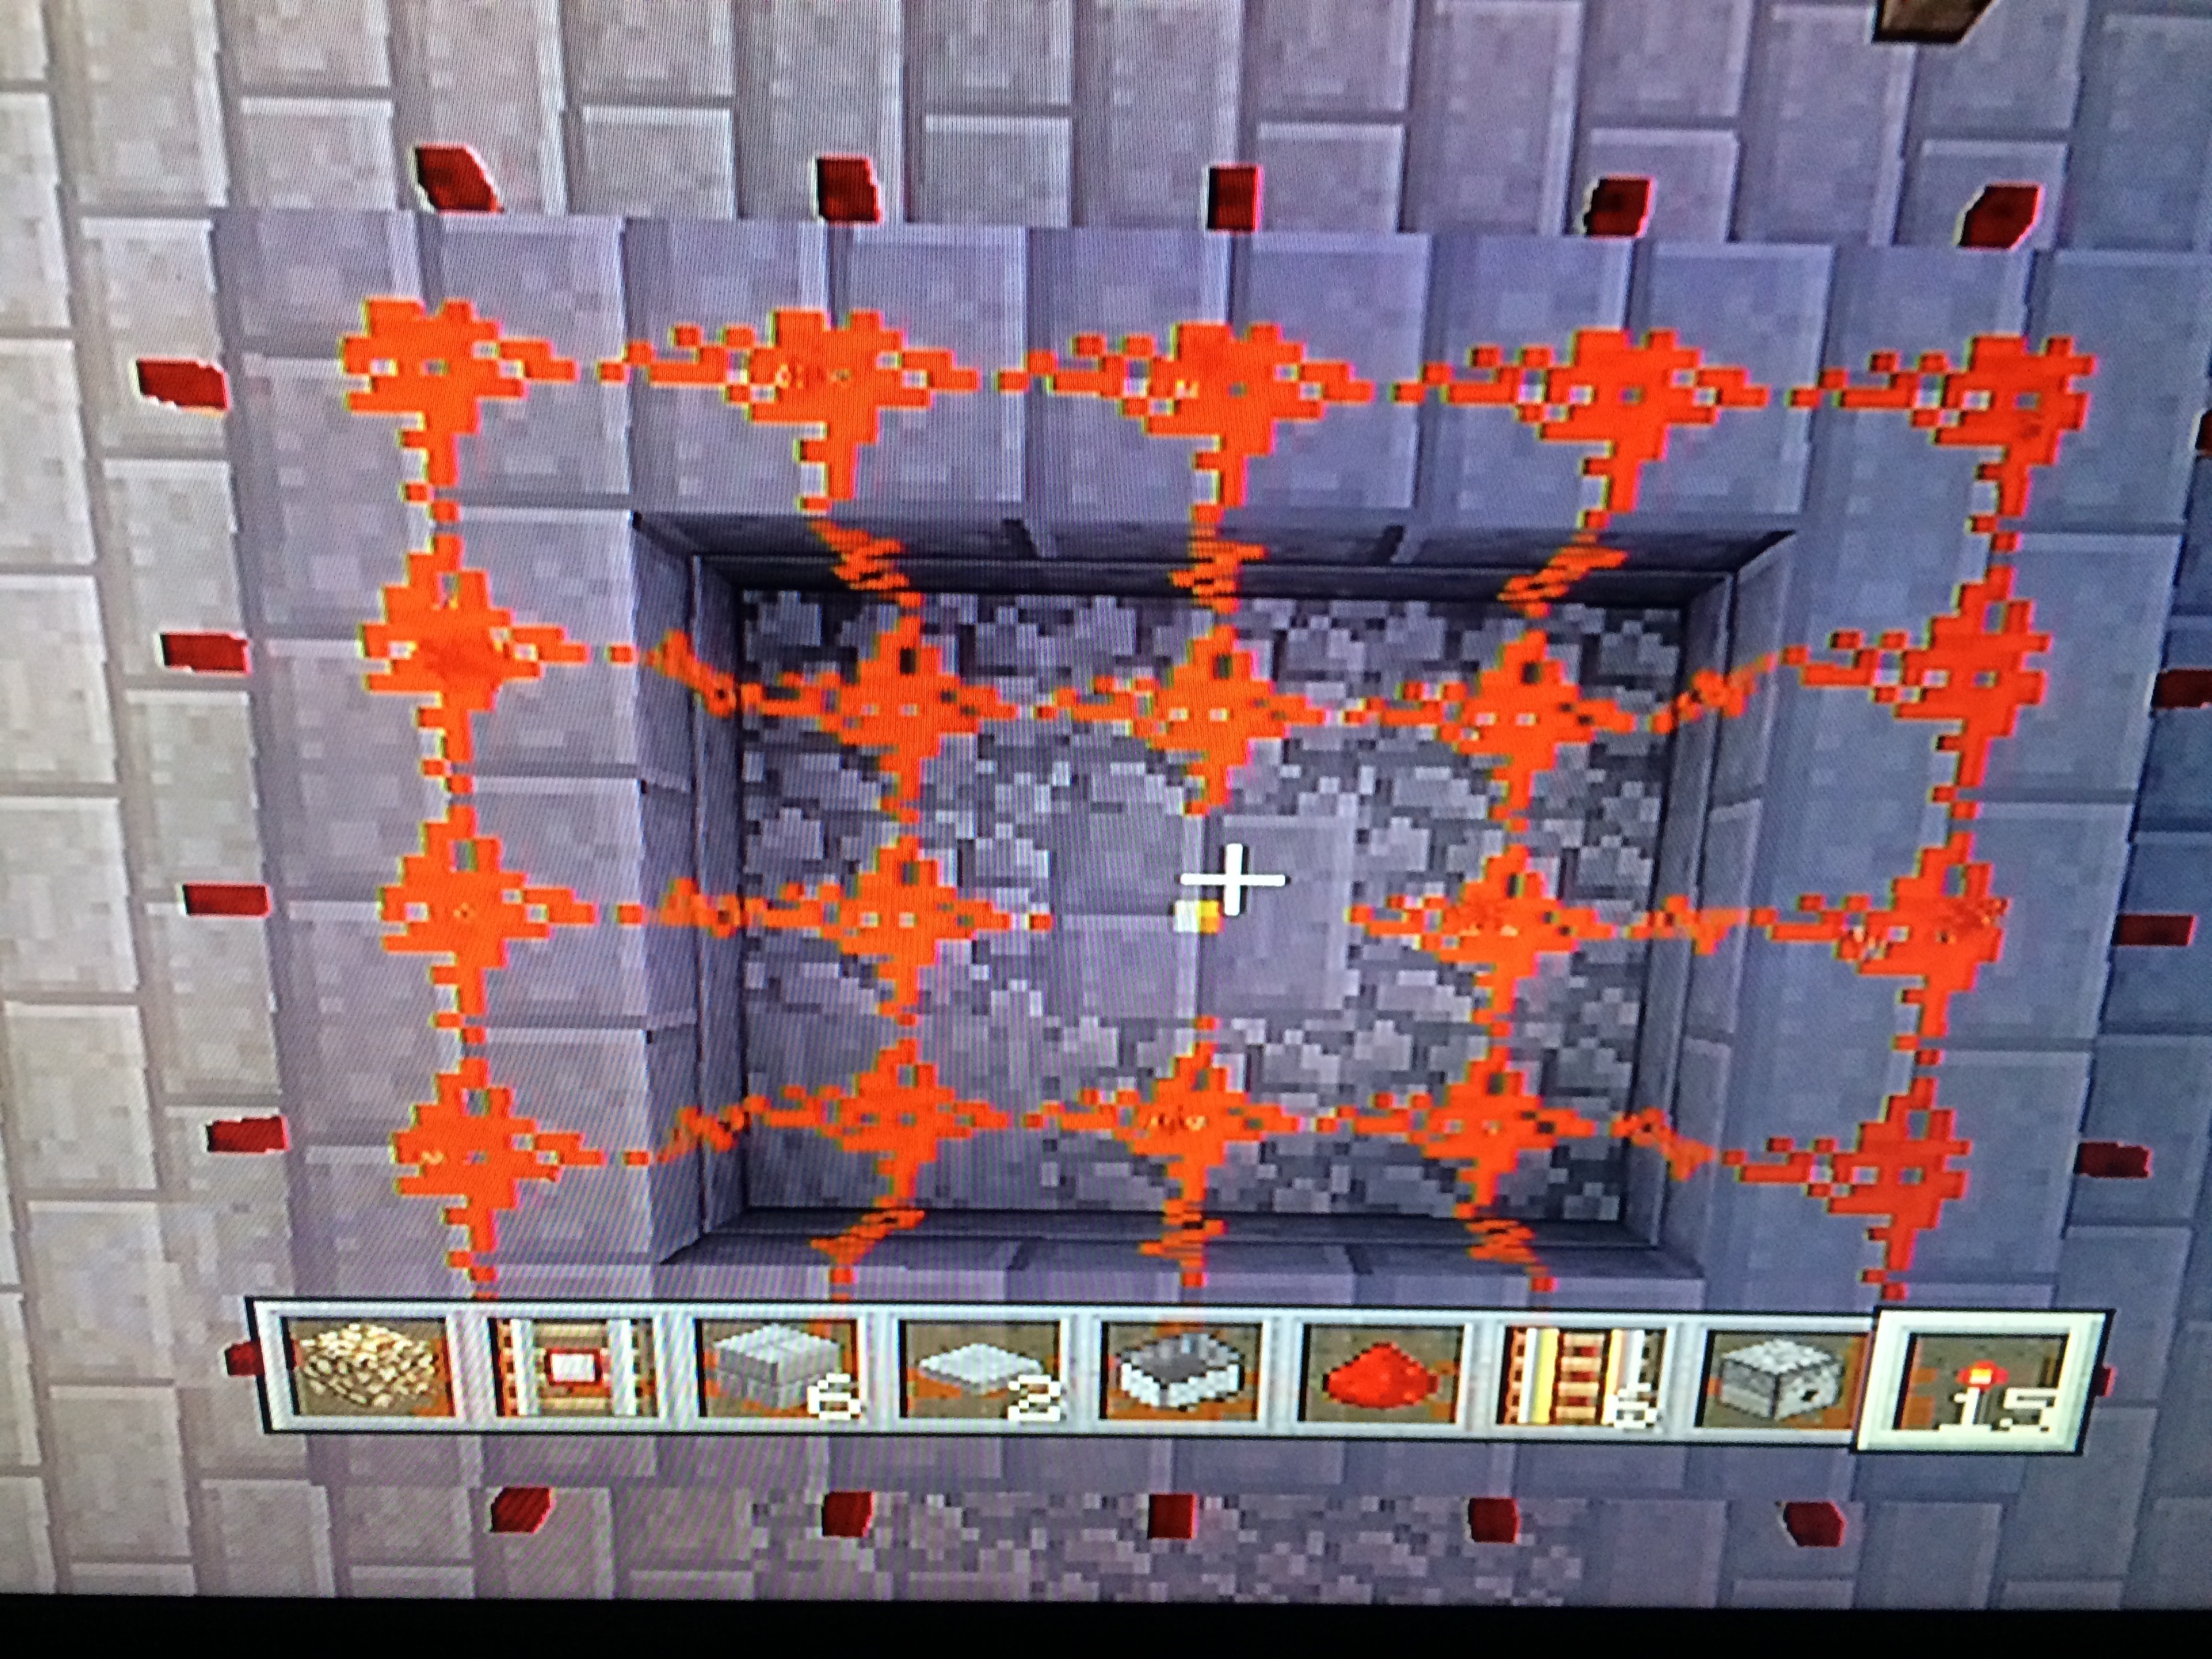 How-To: Build Redstone Circuits